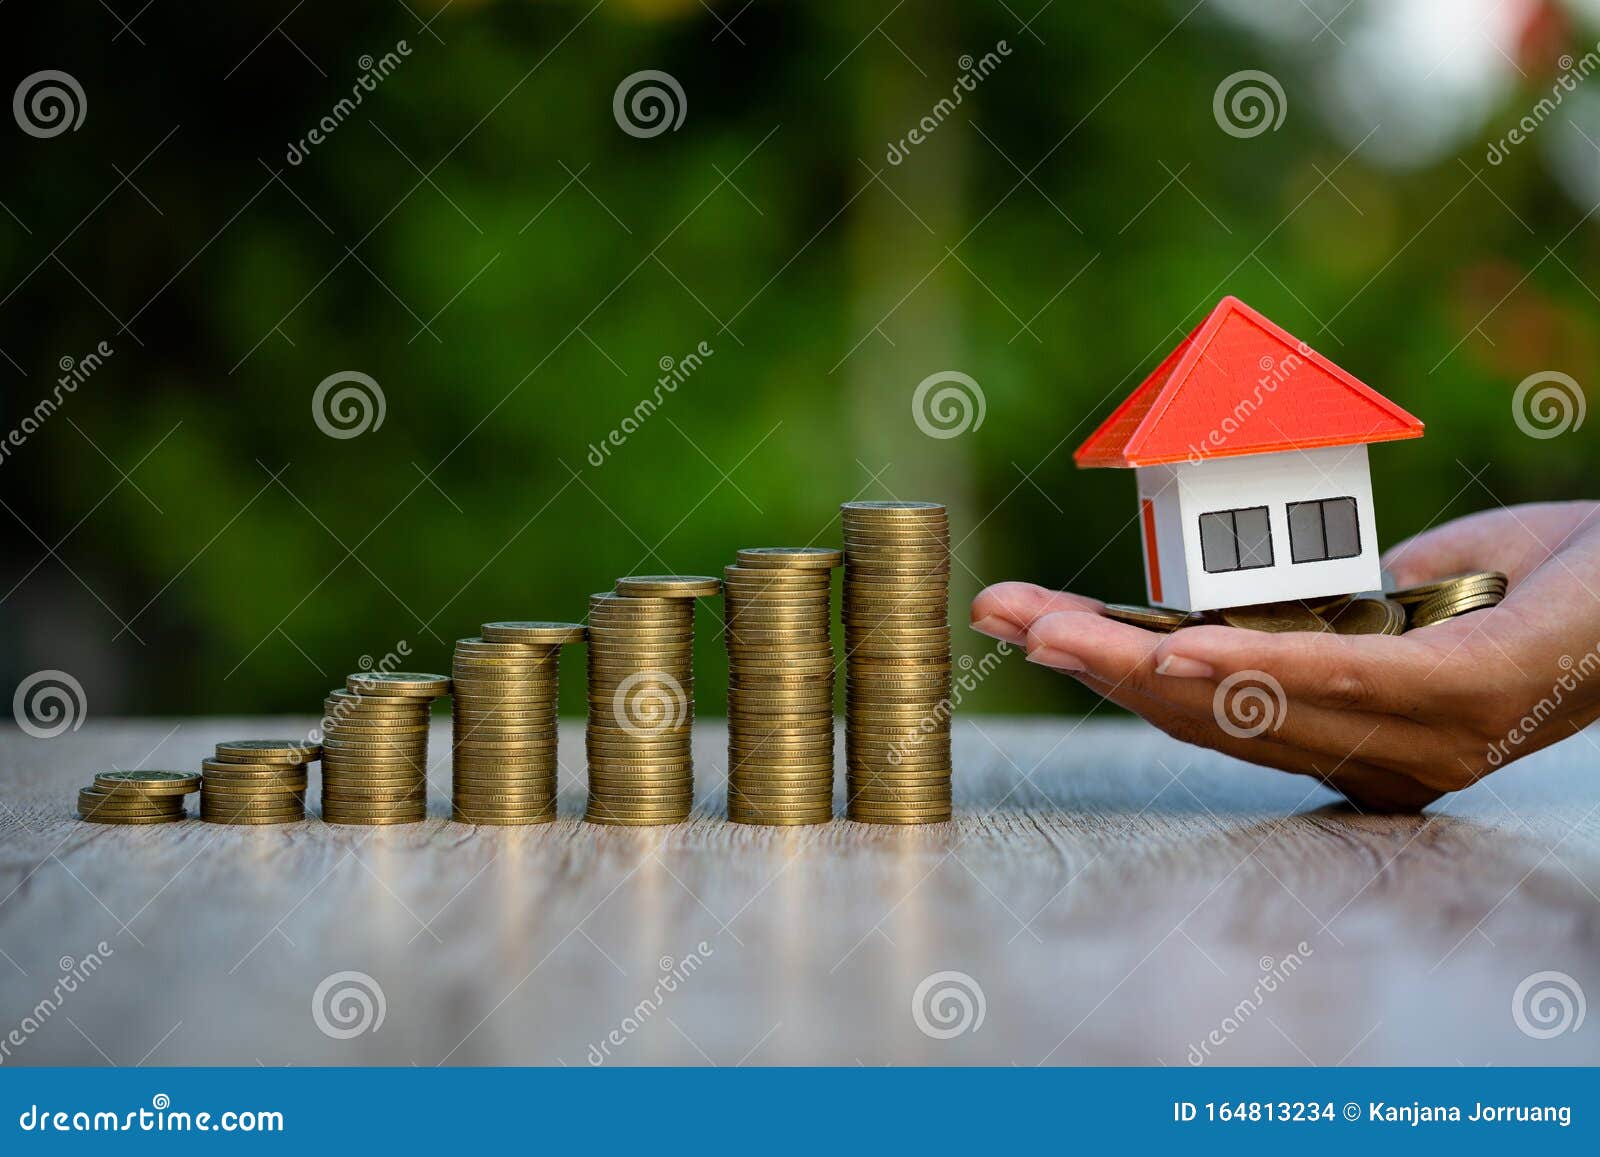 orange roof house in investor`s hand placed close to the medallion, increasing the number of coins. real estate investment concep